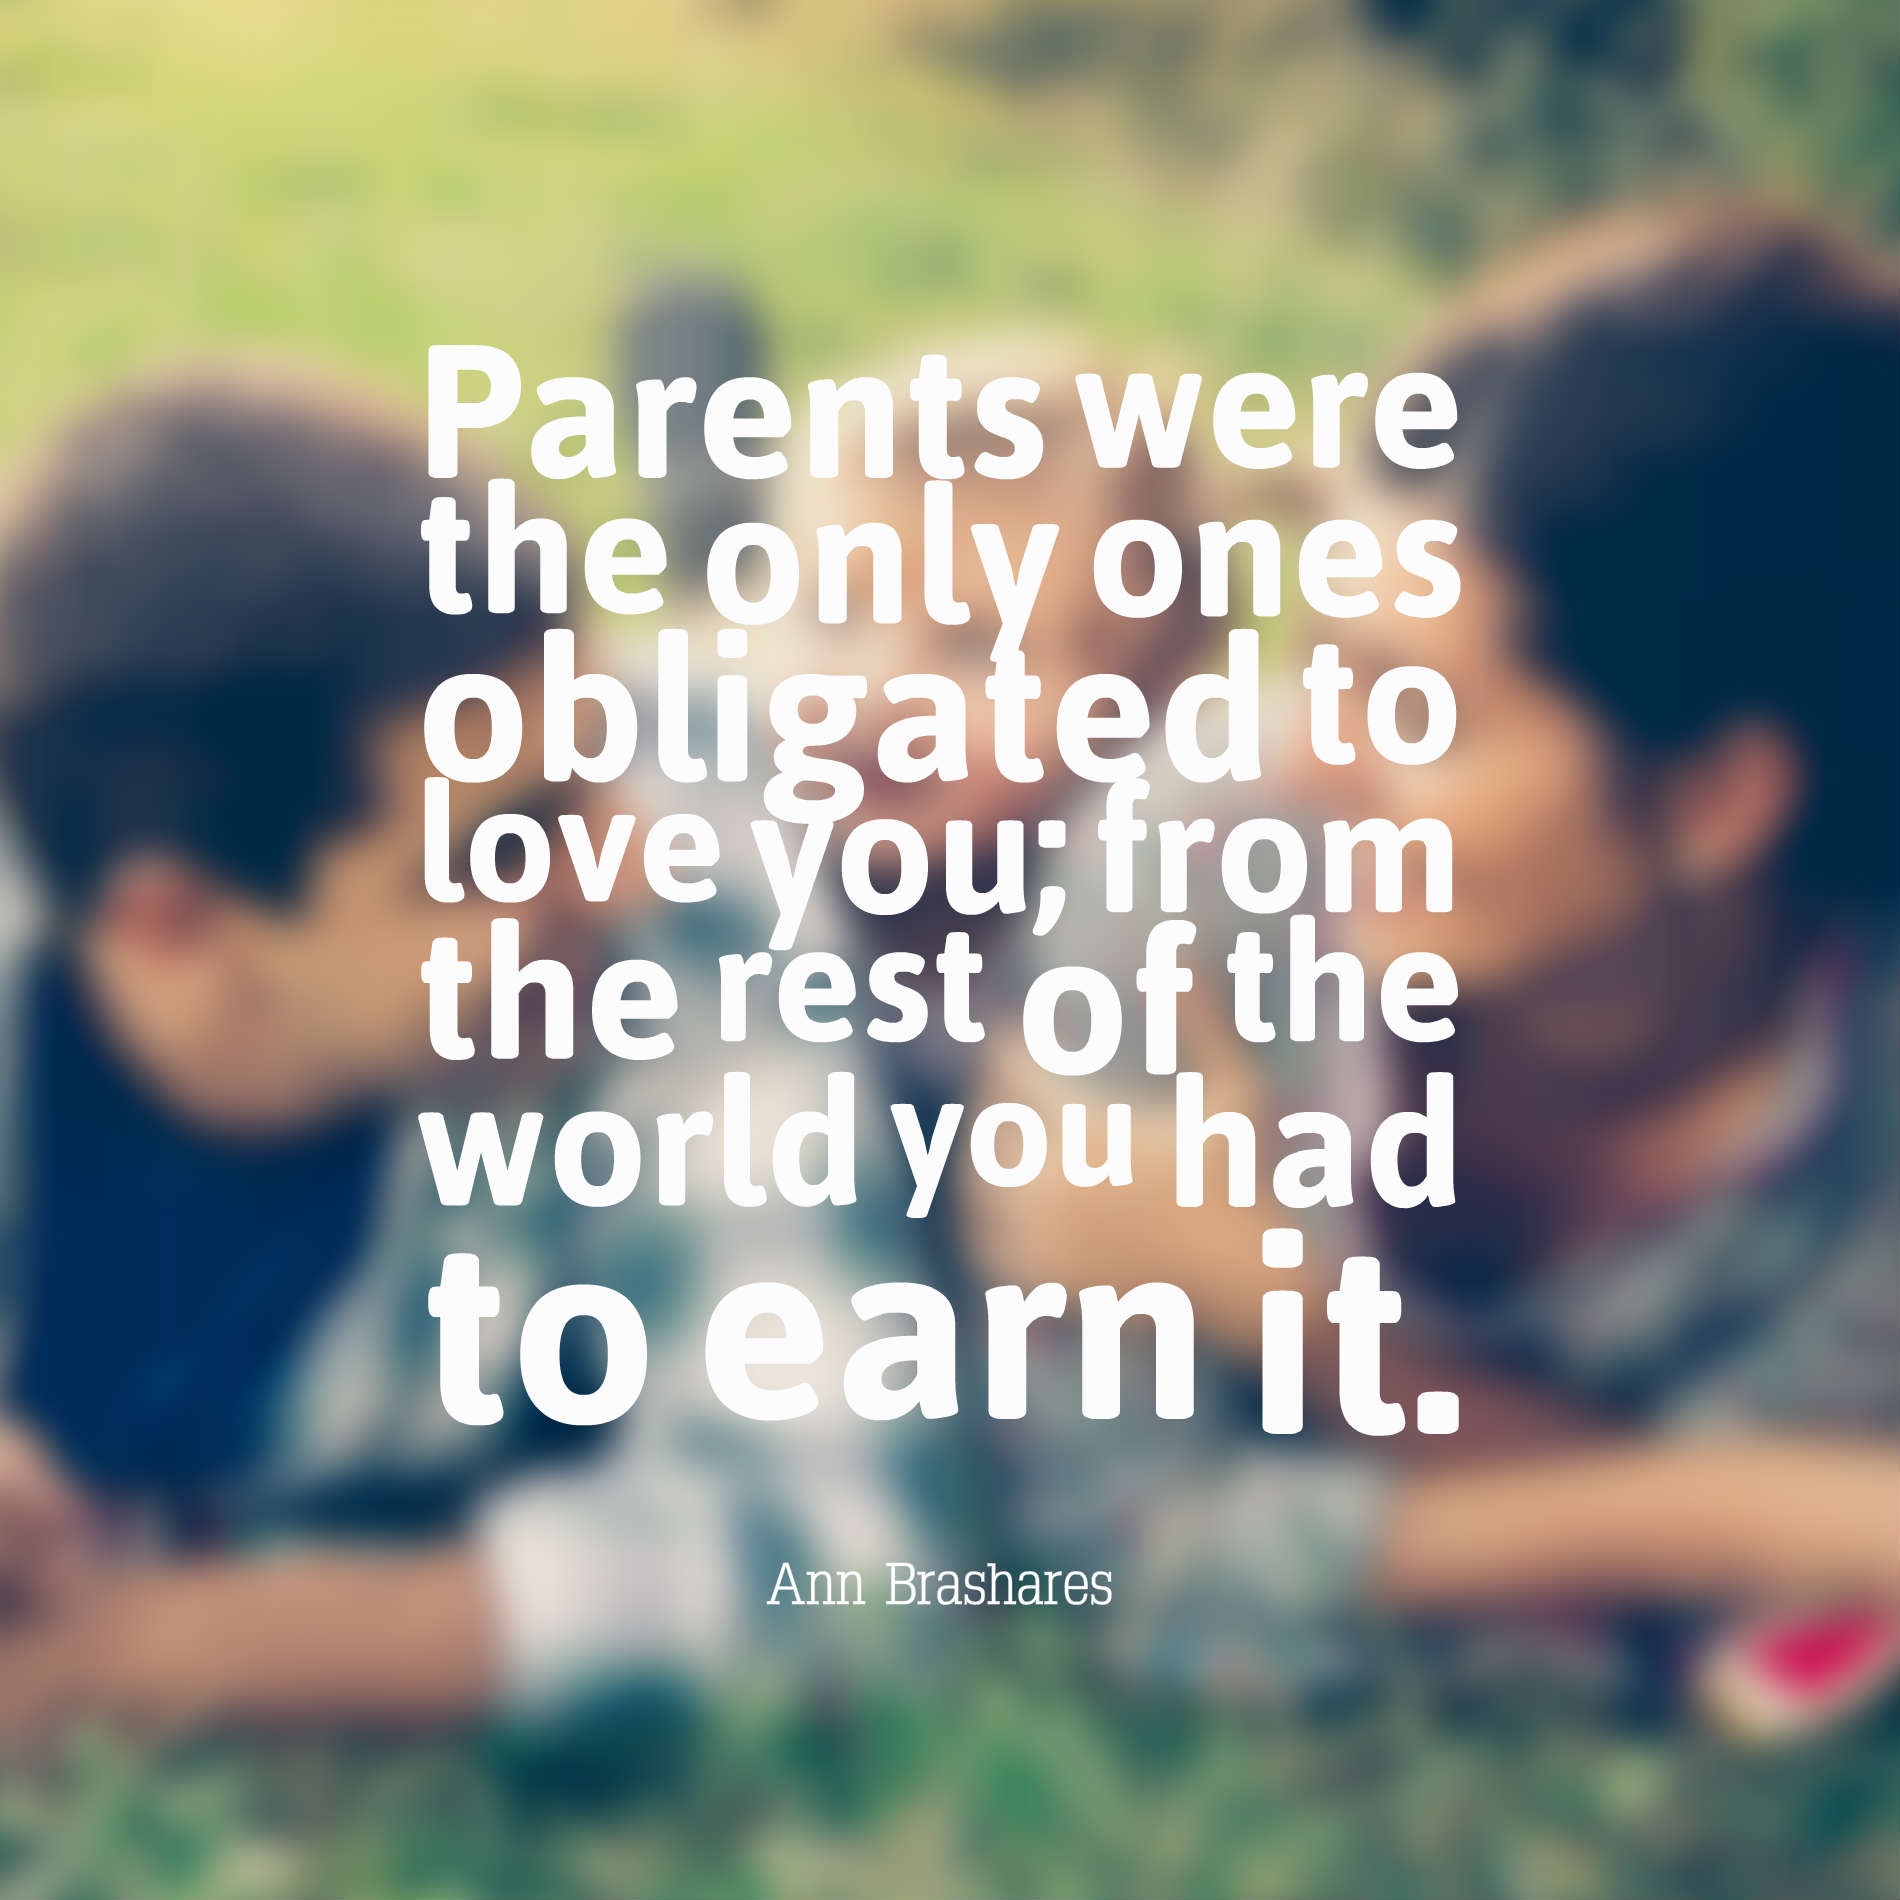 Parents were the only ones obligated to love you; from the rest of the world you had to earn it.